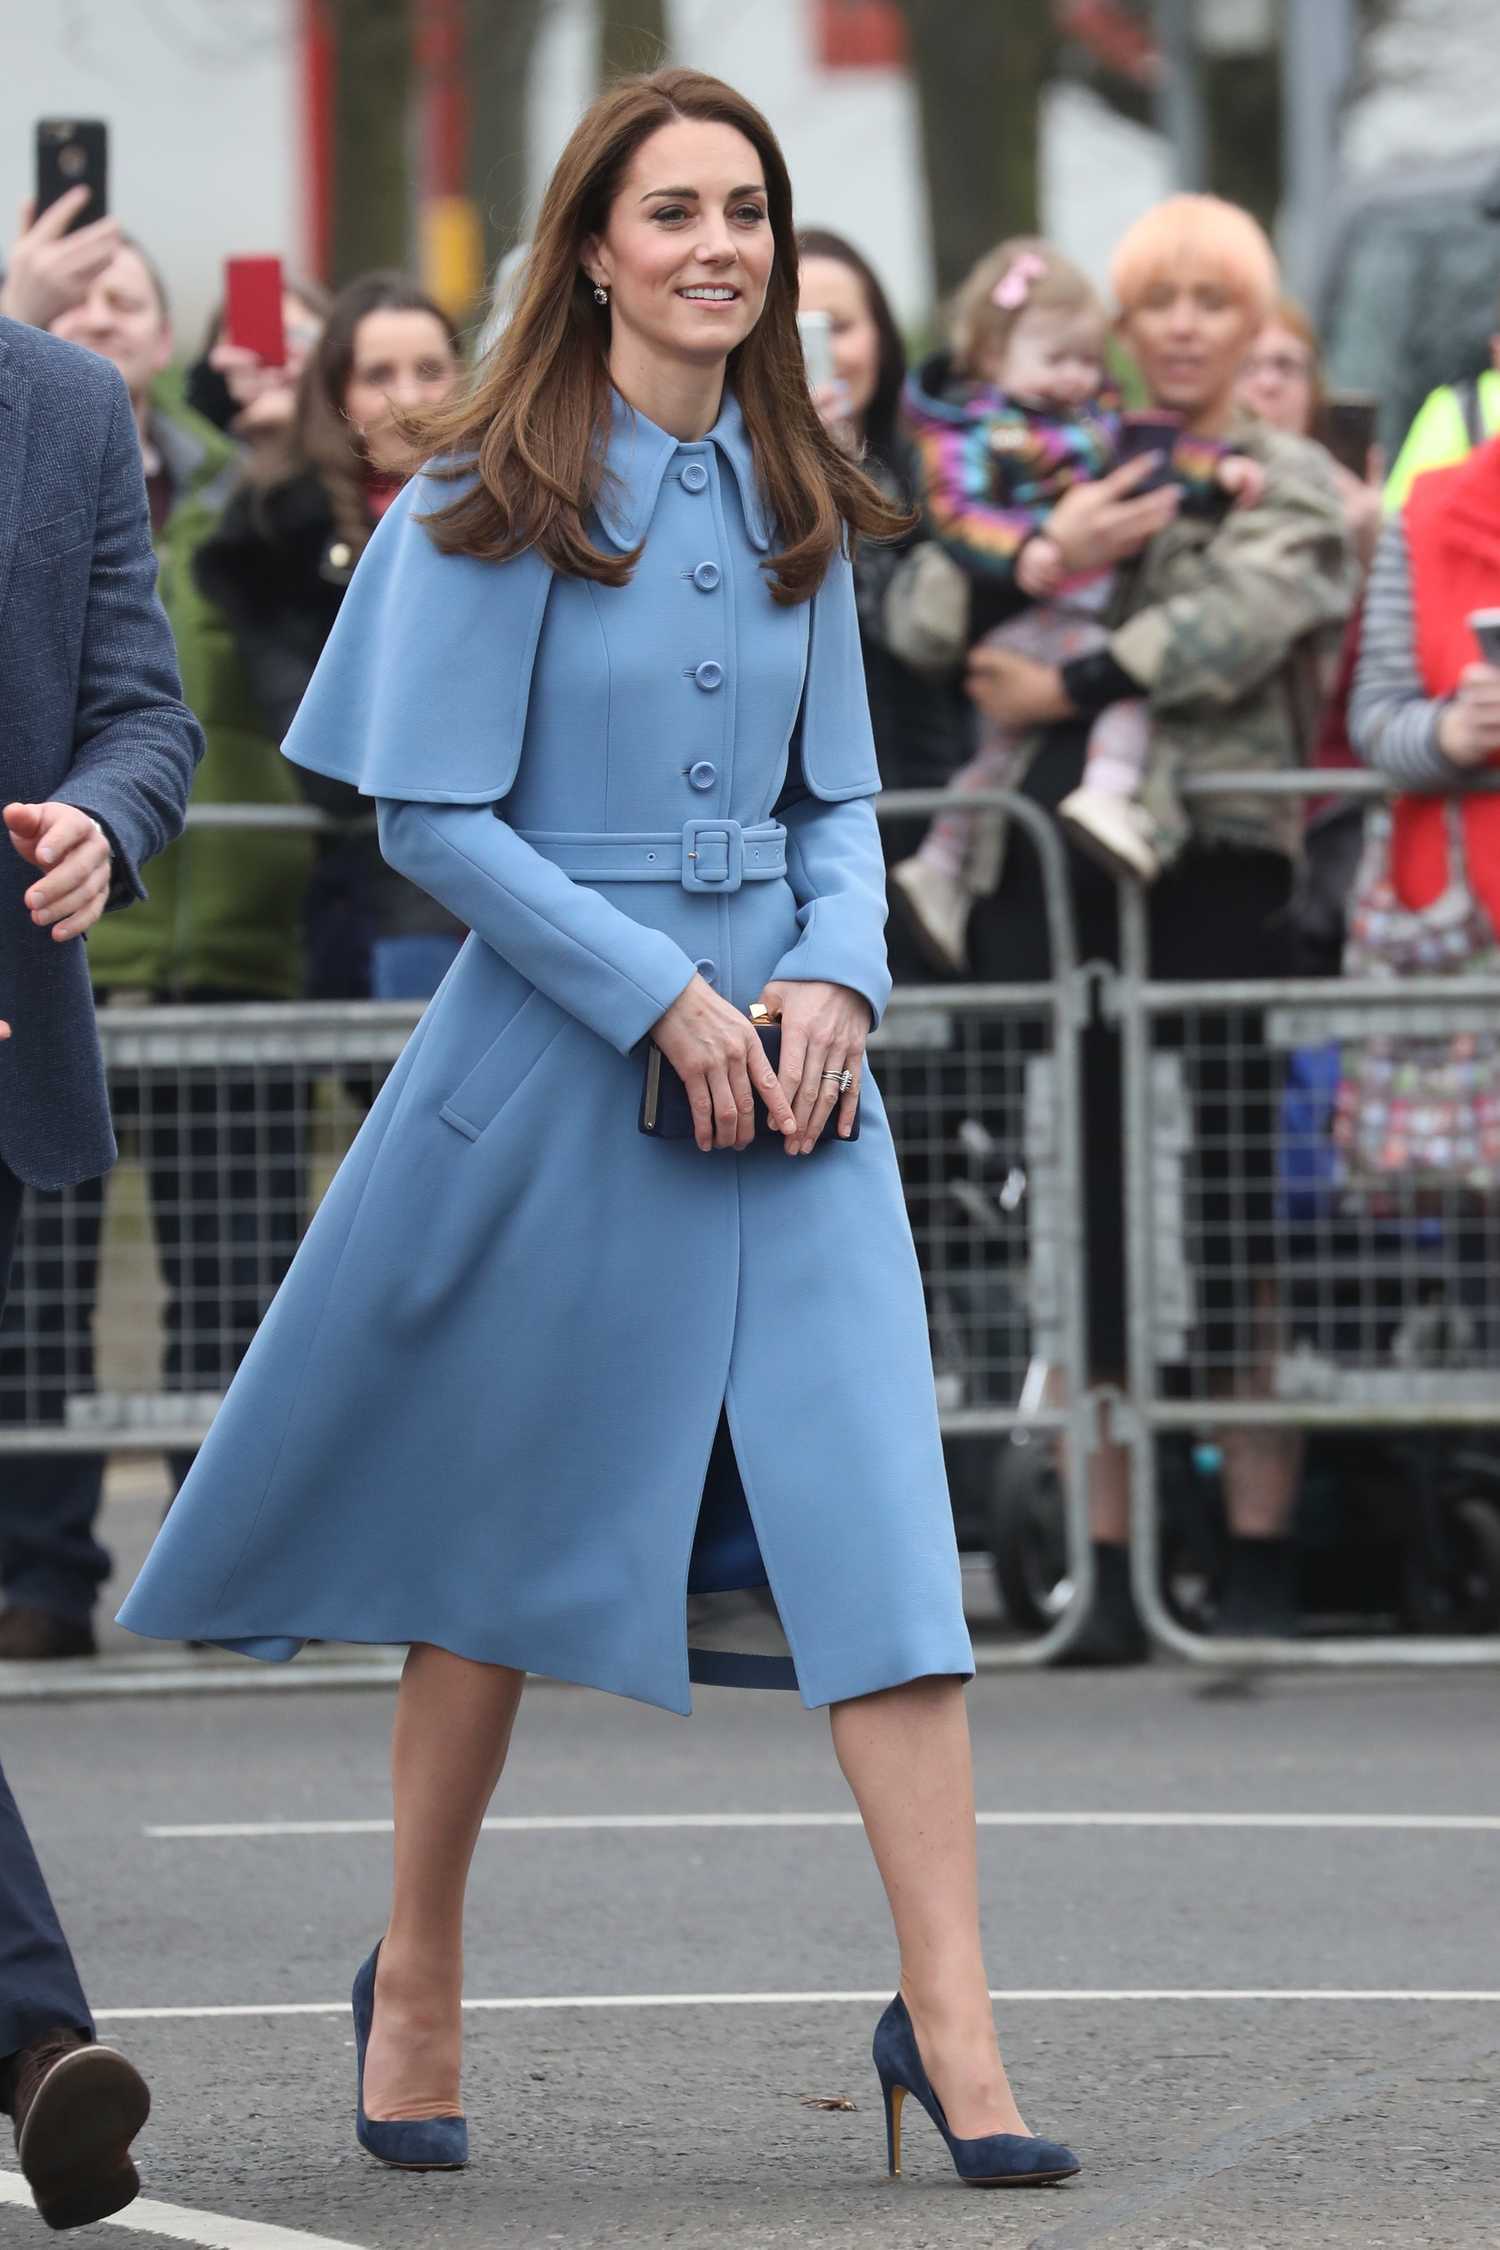 Kate Middleton in a Blue Coat Visits CineMagic at the Braid Arts Centre ...